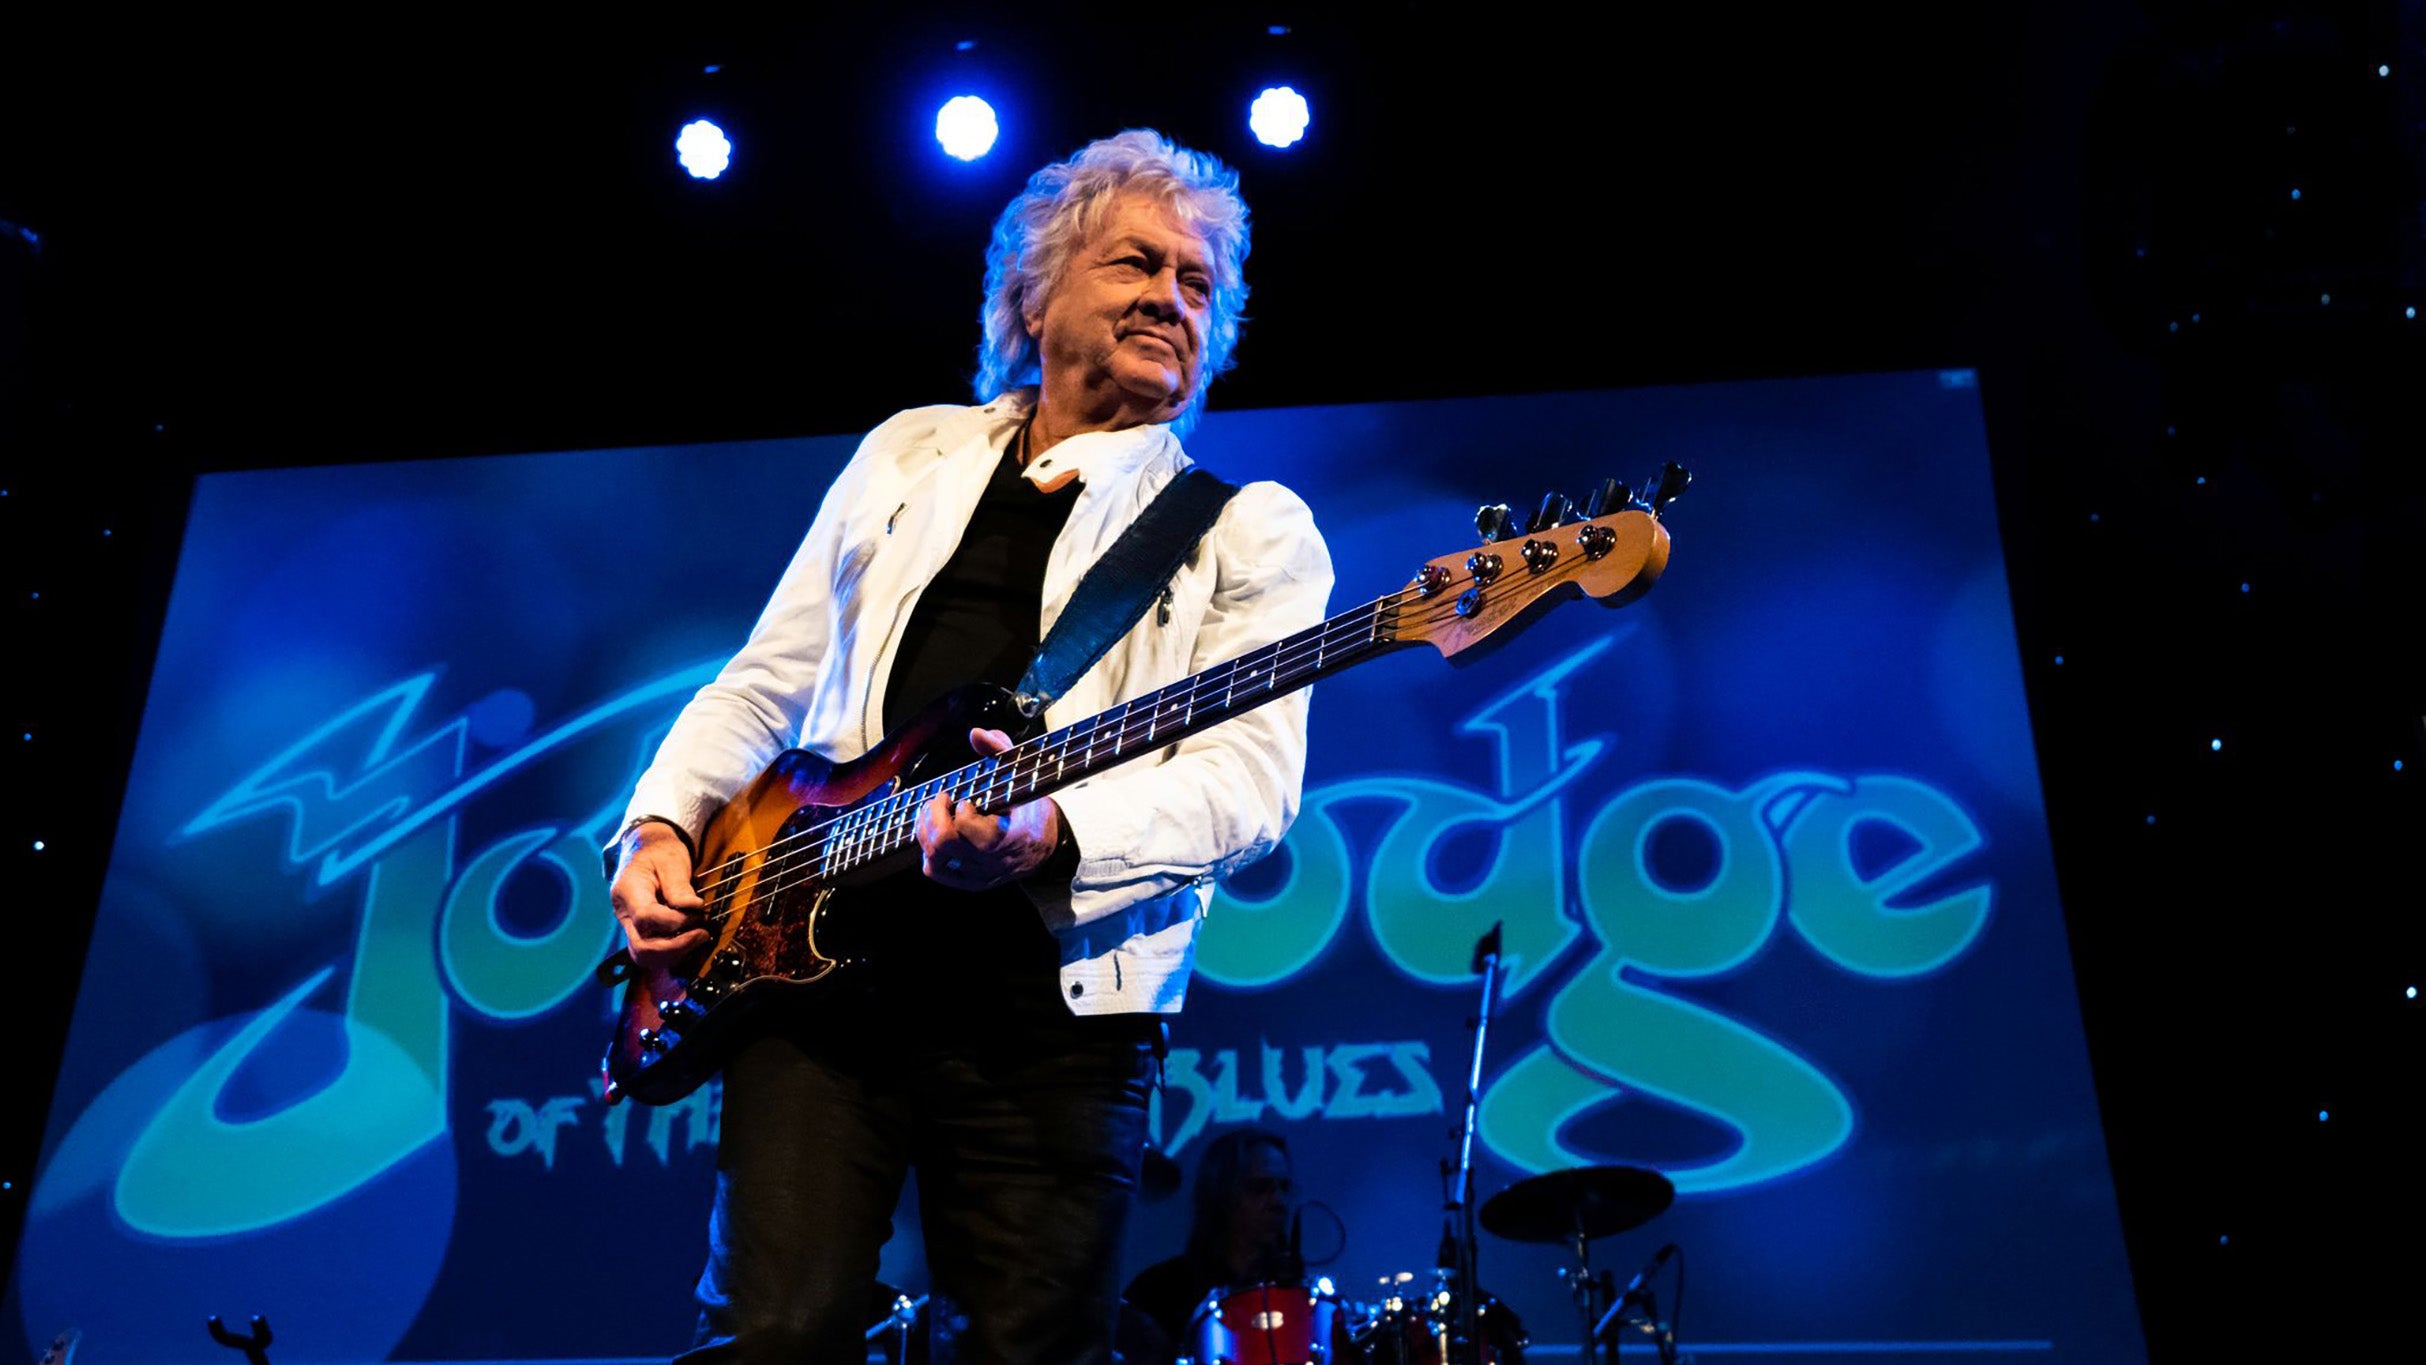 The Moody Blues' John Lodge in Clearwater promo photo for Exclusive presale offer code